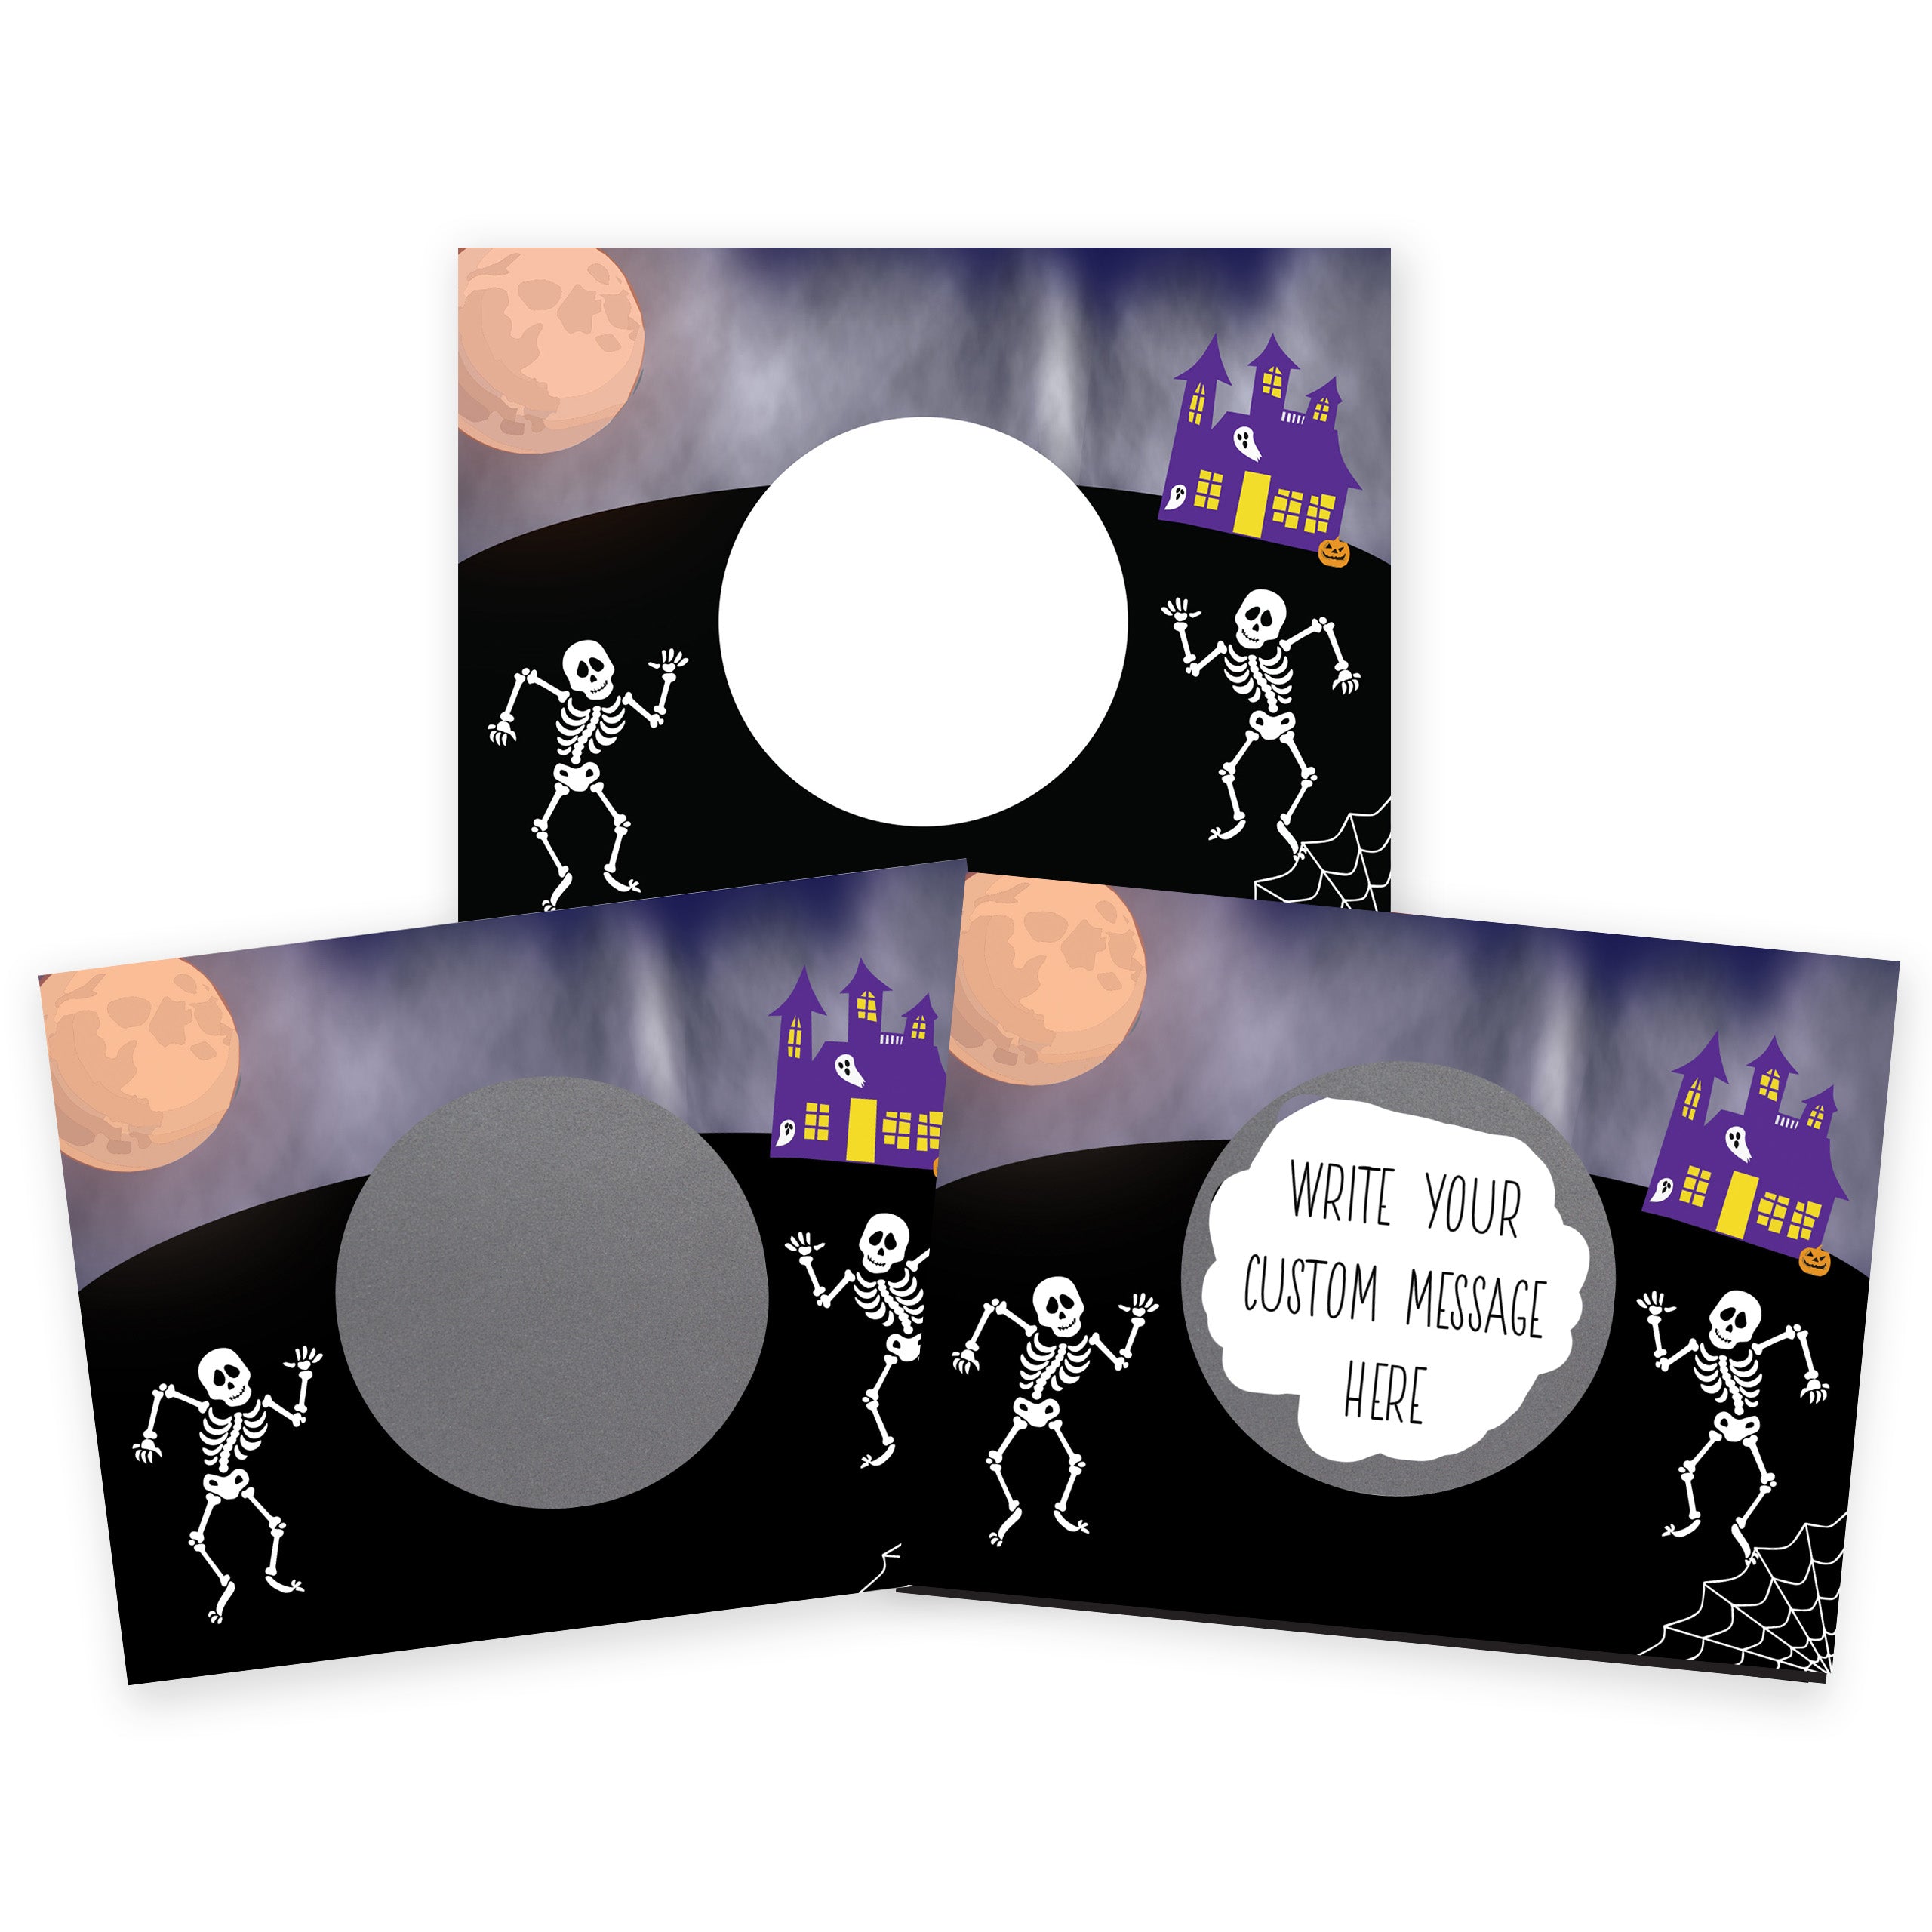 DIY Halloween Spooky Skeleton Make Your Own Scratch Offs - 20 Cards and 20 Scratch Off Stickers - My Scratch Offs